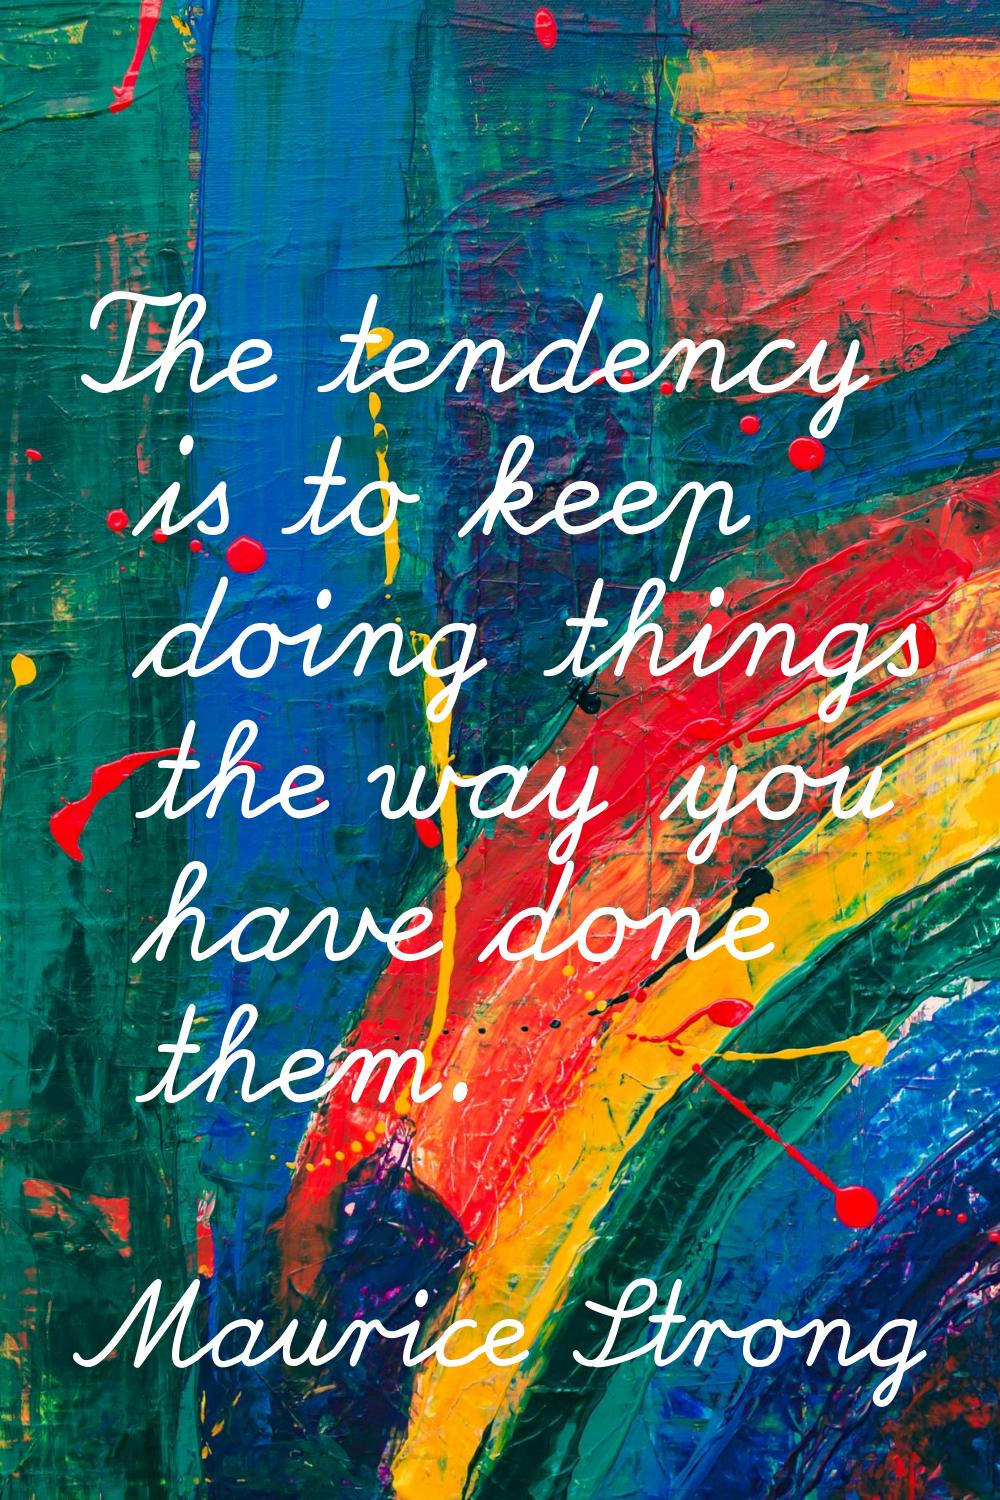 The tendency is to keep doing things the way you have done them.